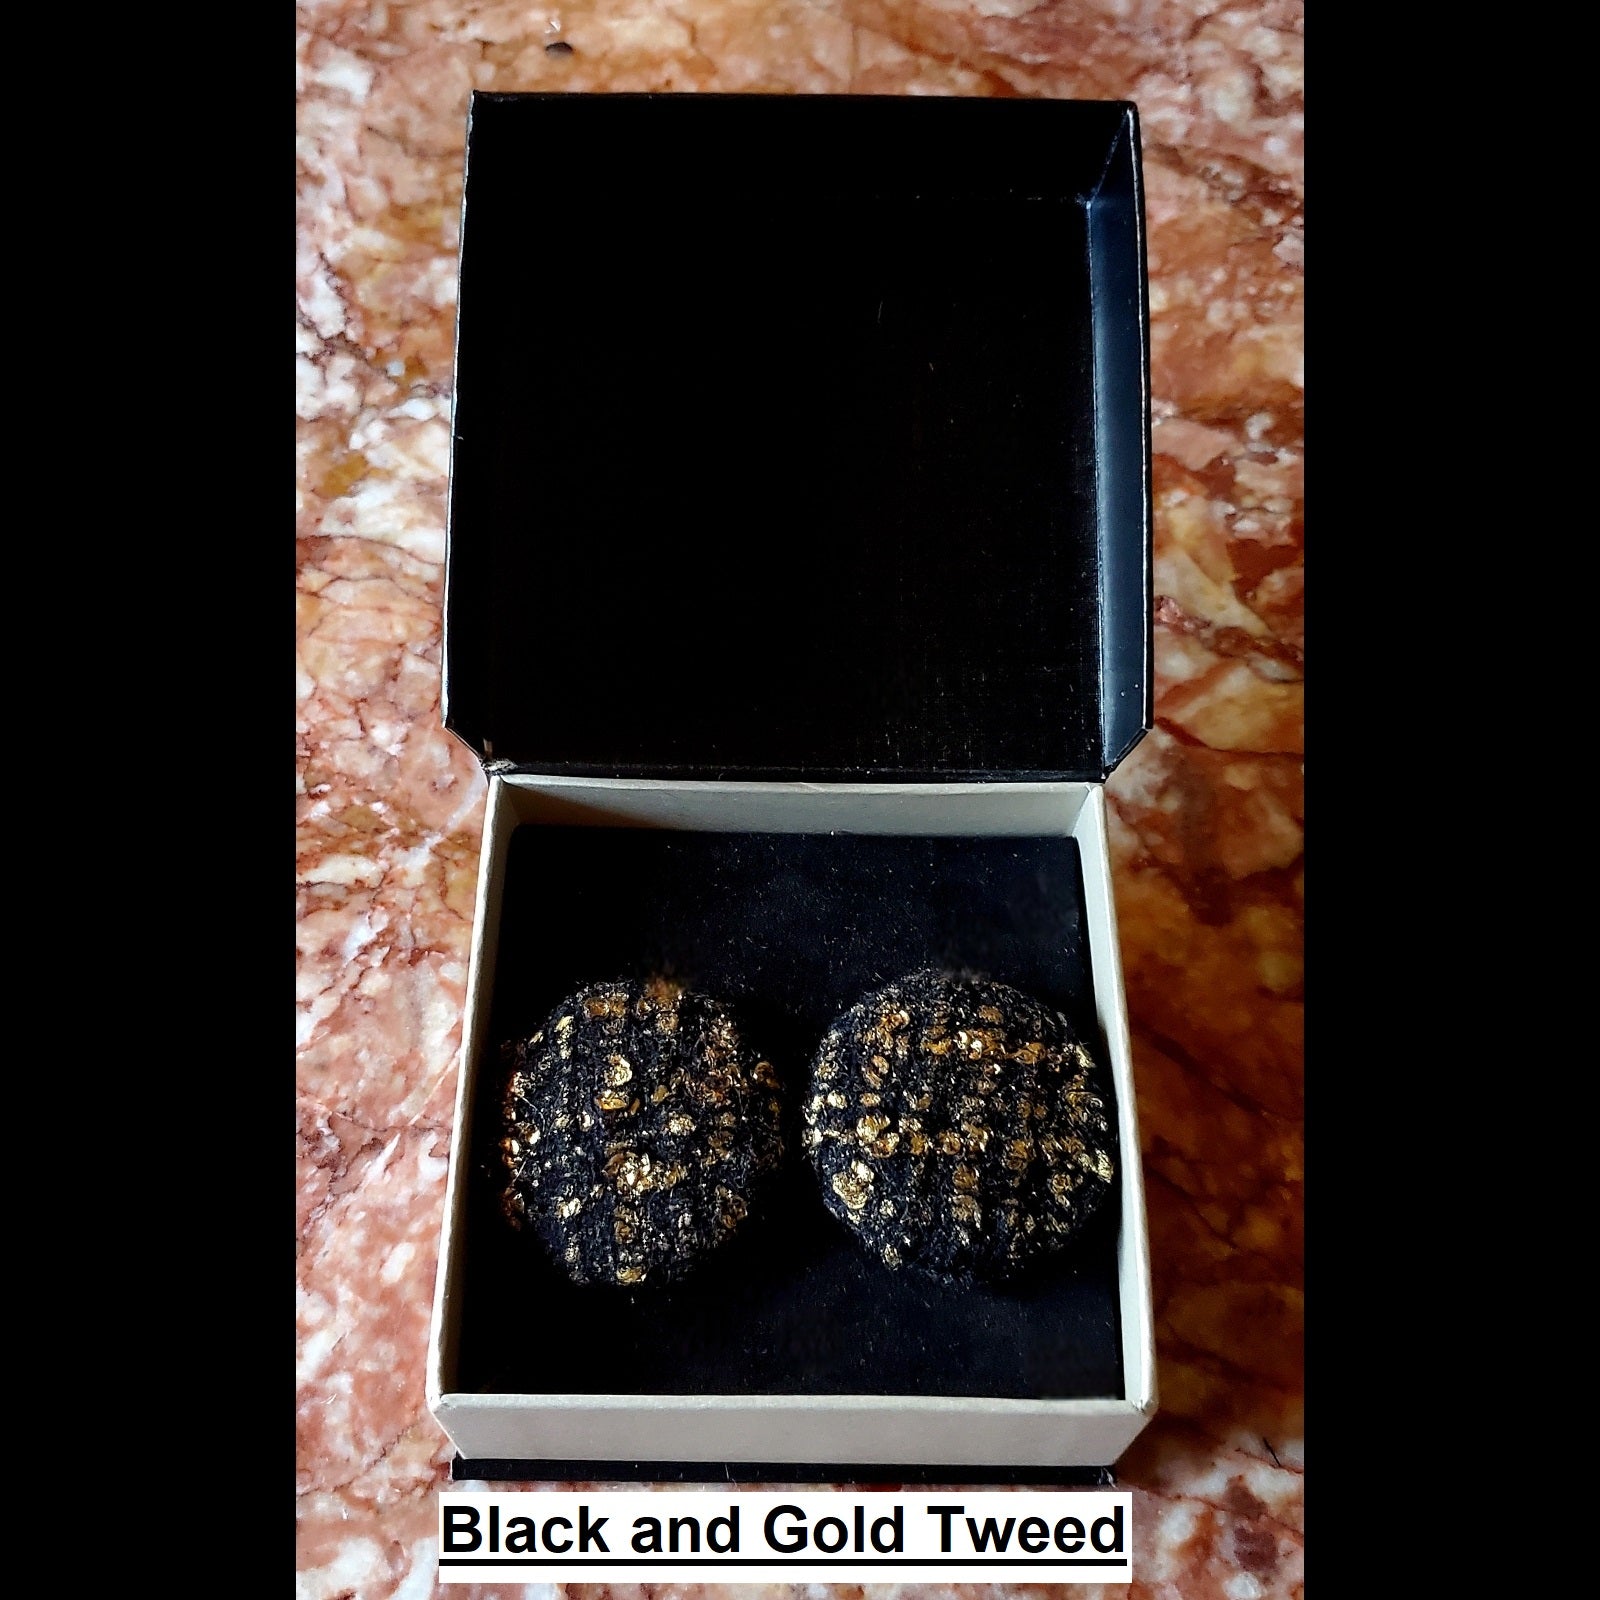 Black and gold tweed print button earrings in jewelry box